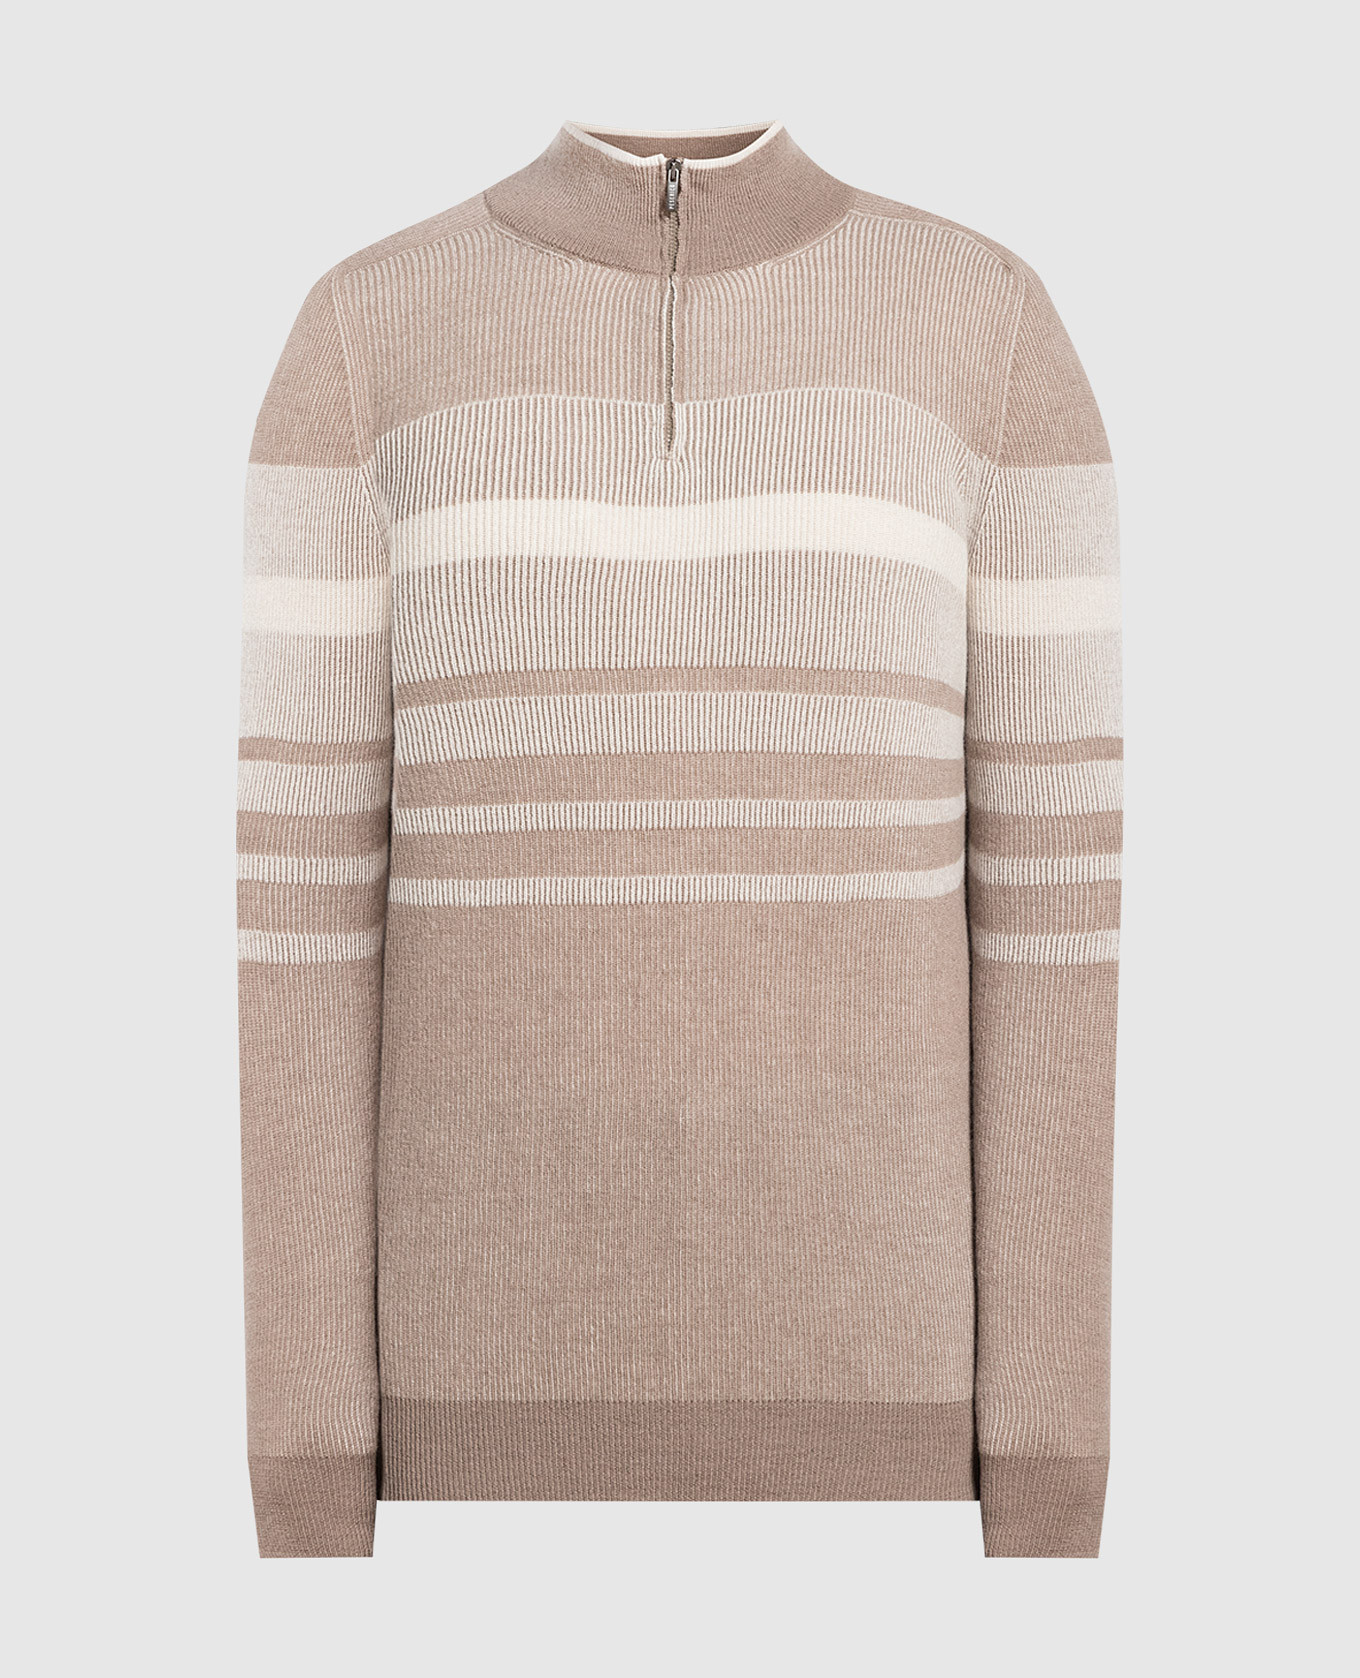 Beige wool and cashmere jumper